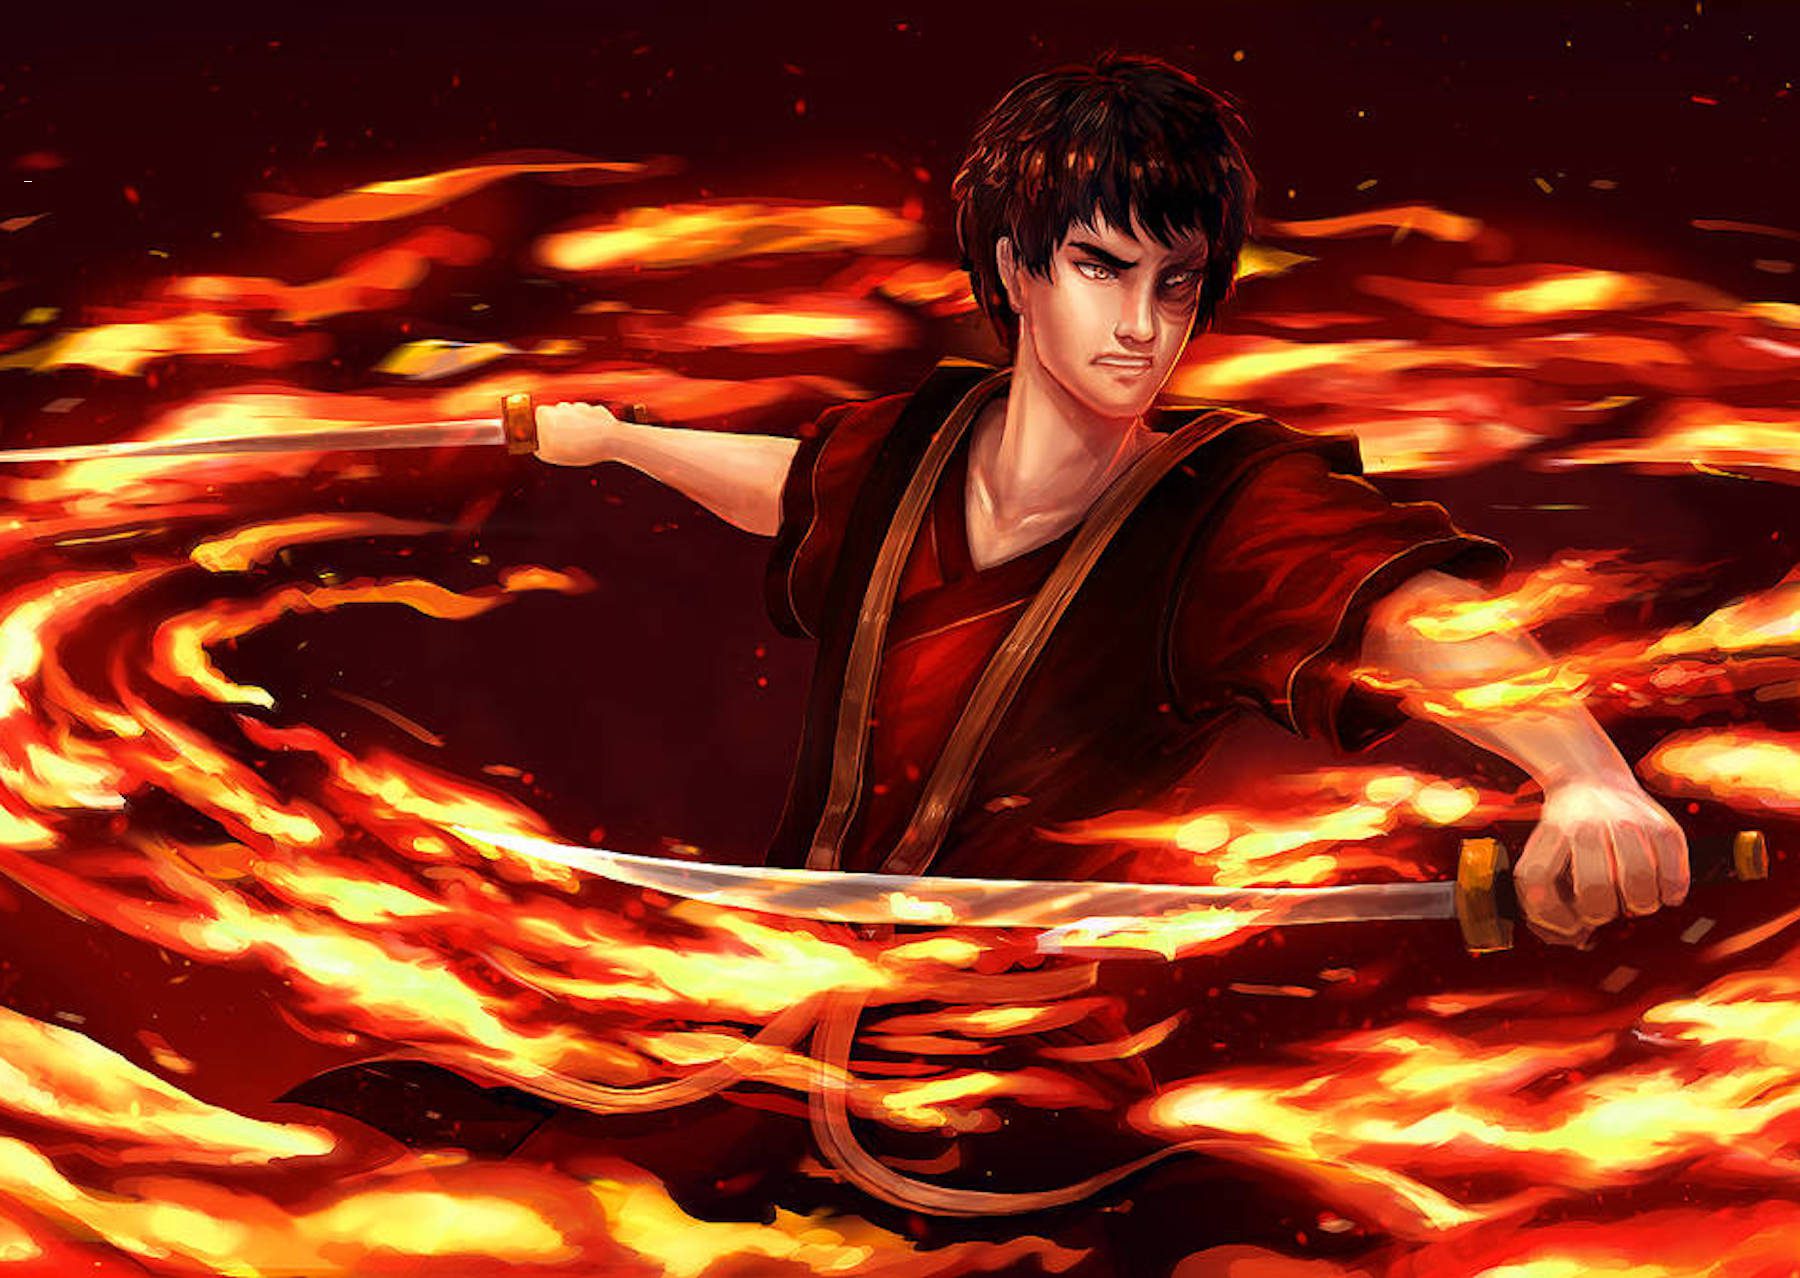 Zuko from Avatar franchise with depiction of firebending power.